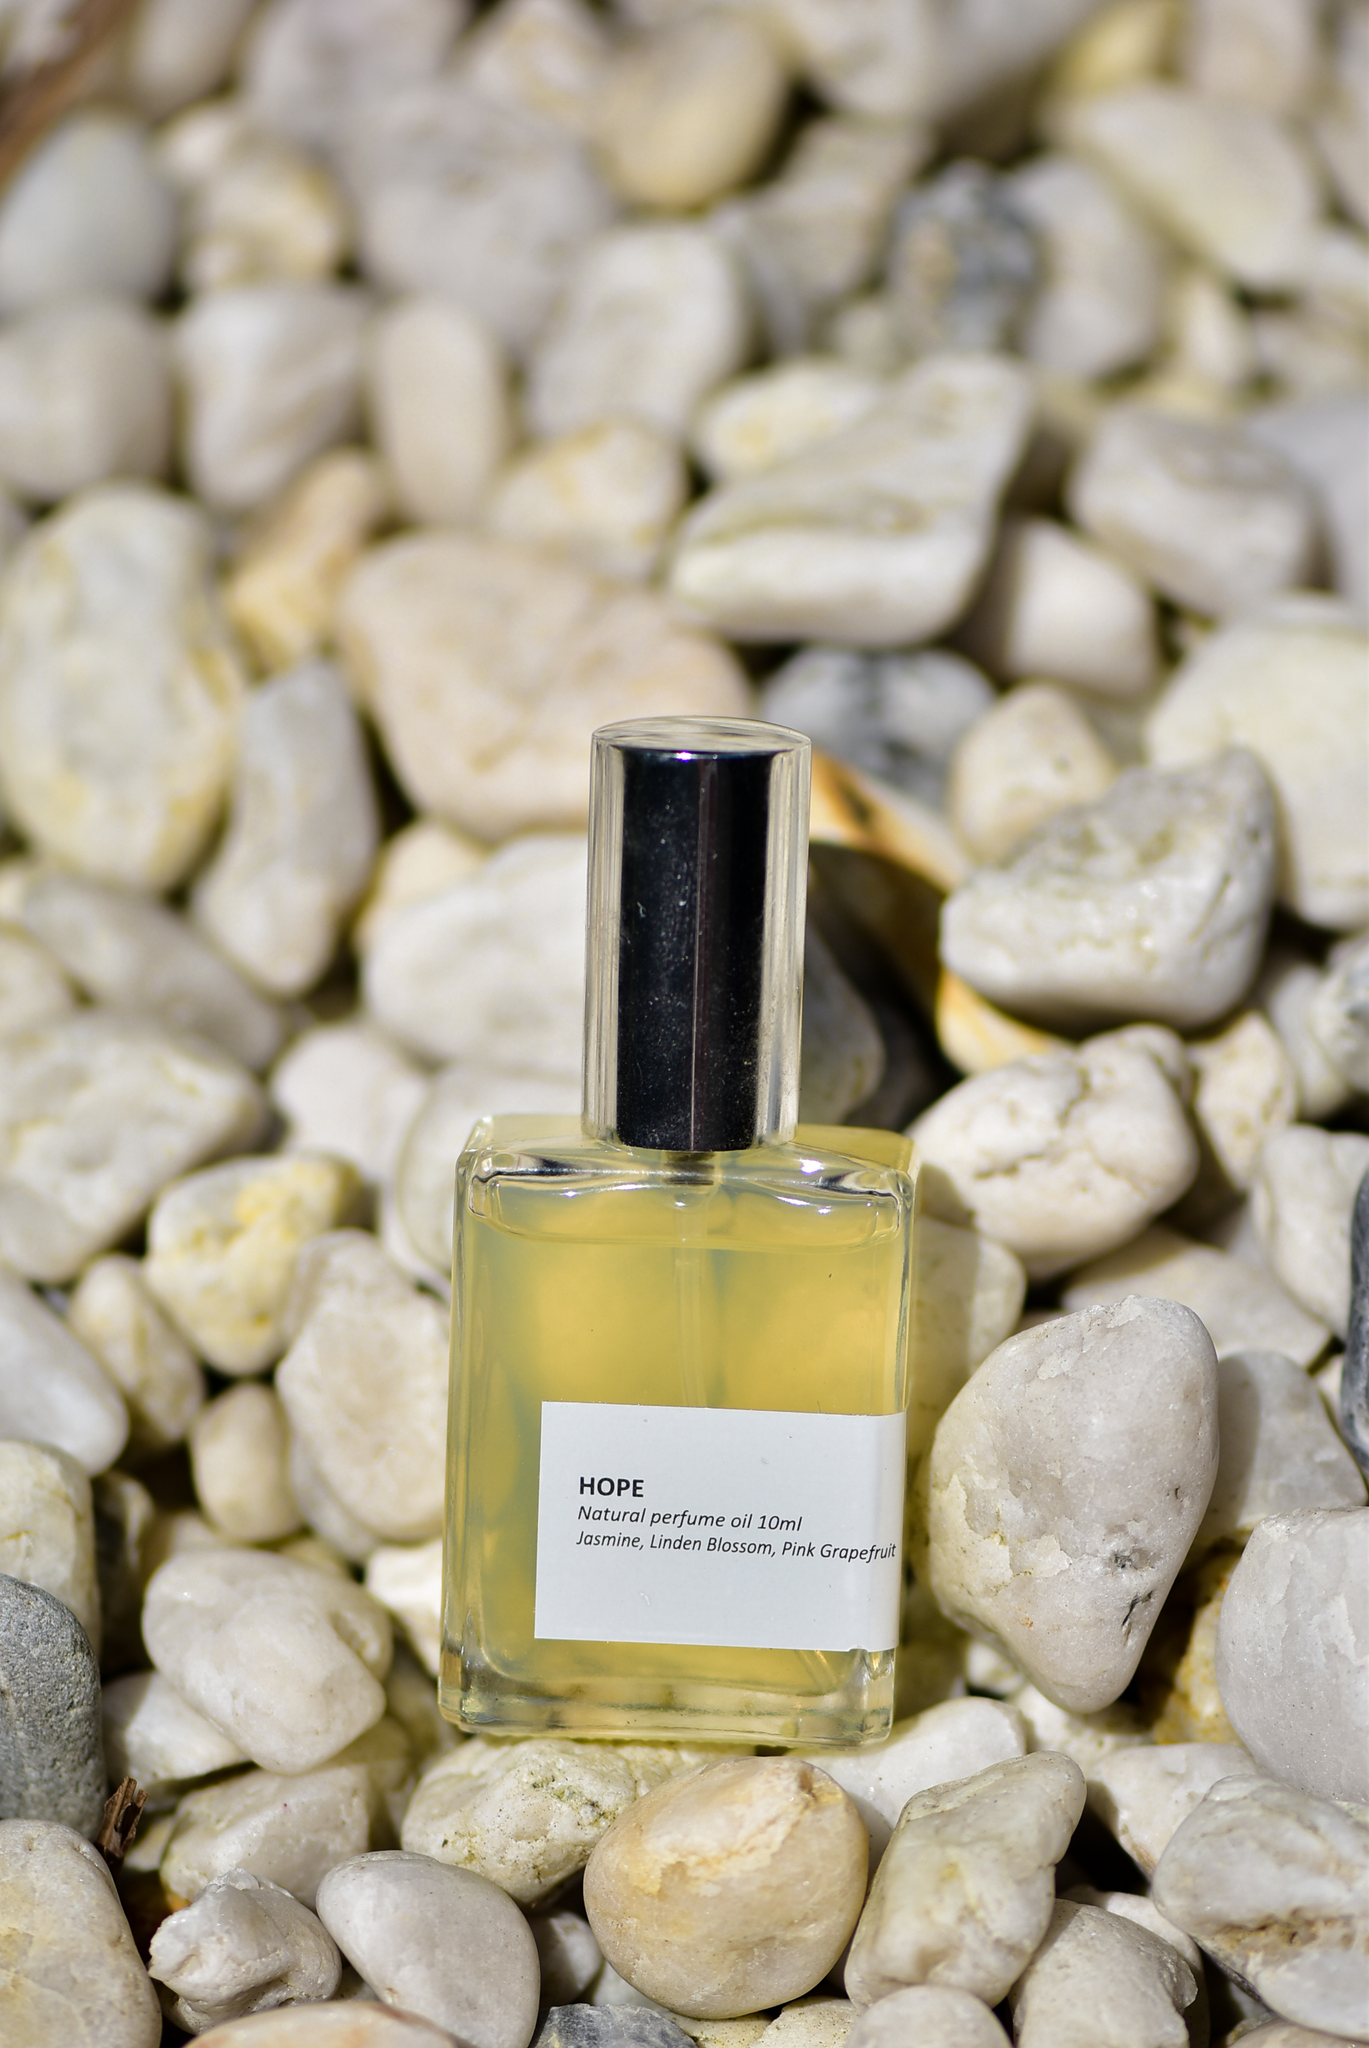 'Hope' oil perfume captured on a background of white rocks.